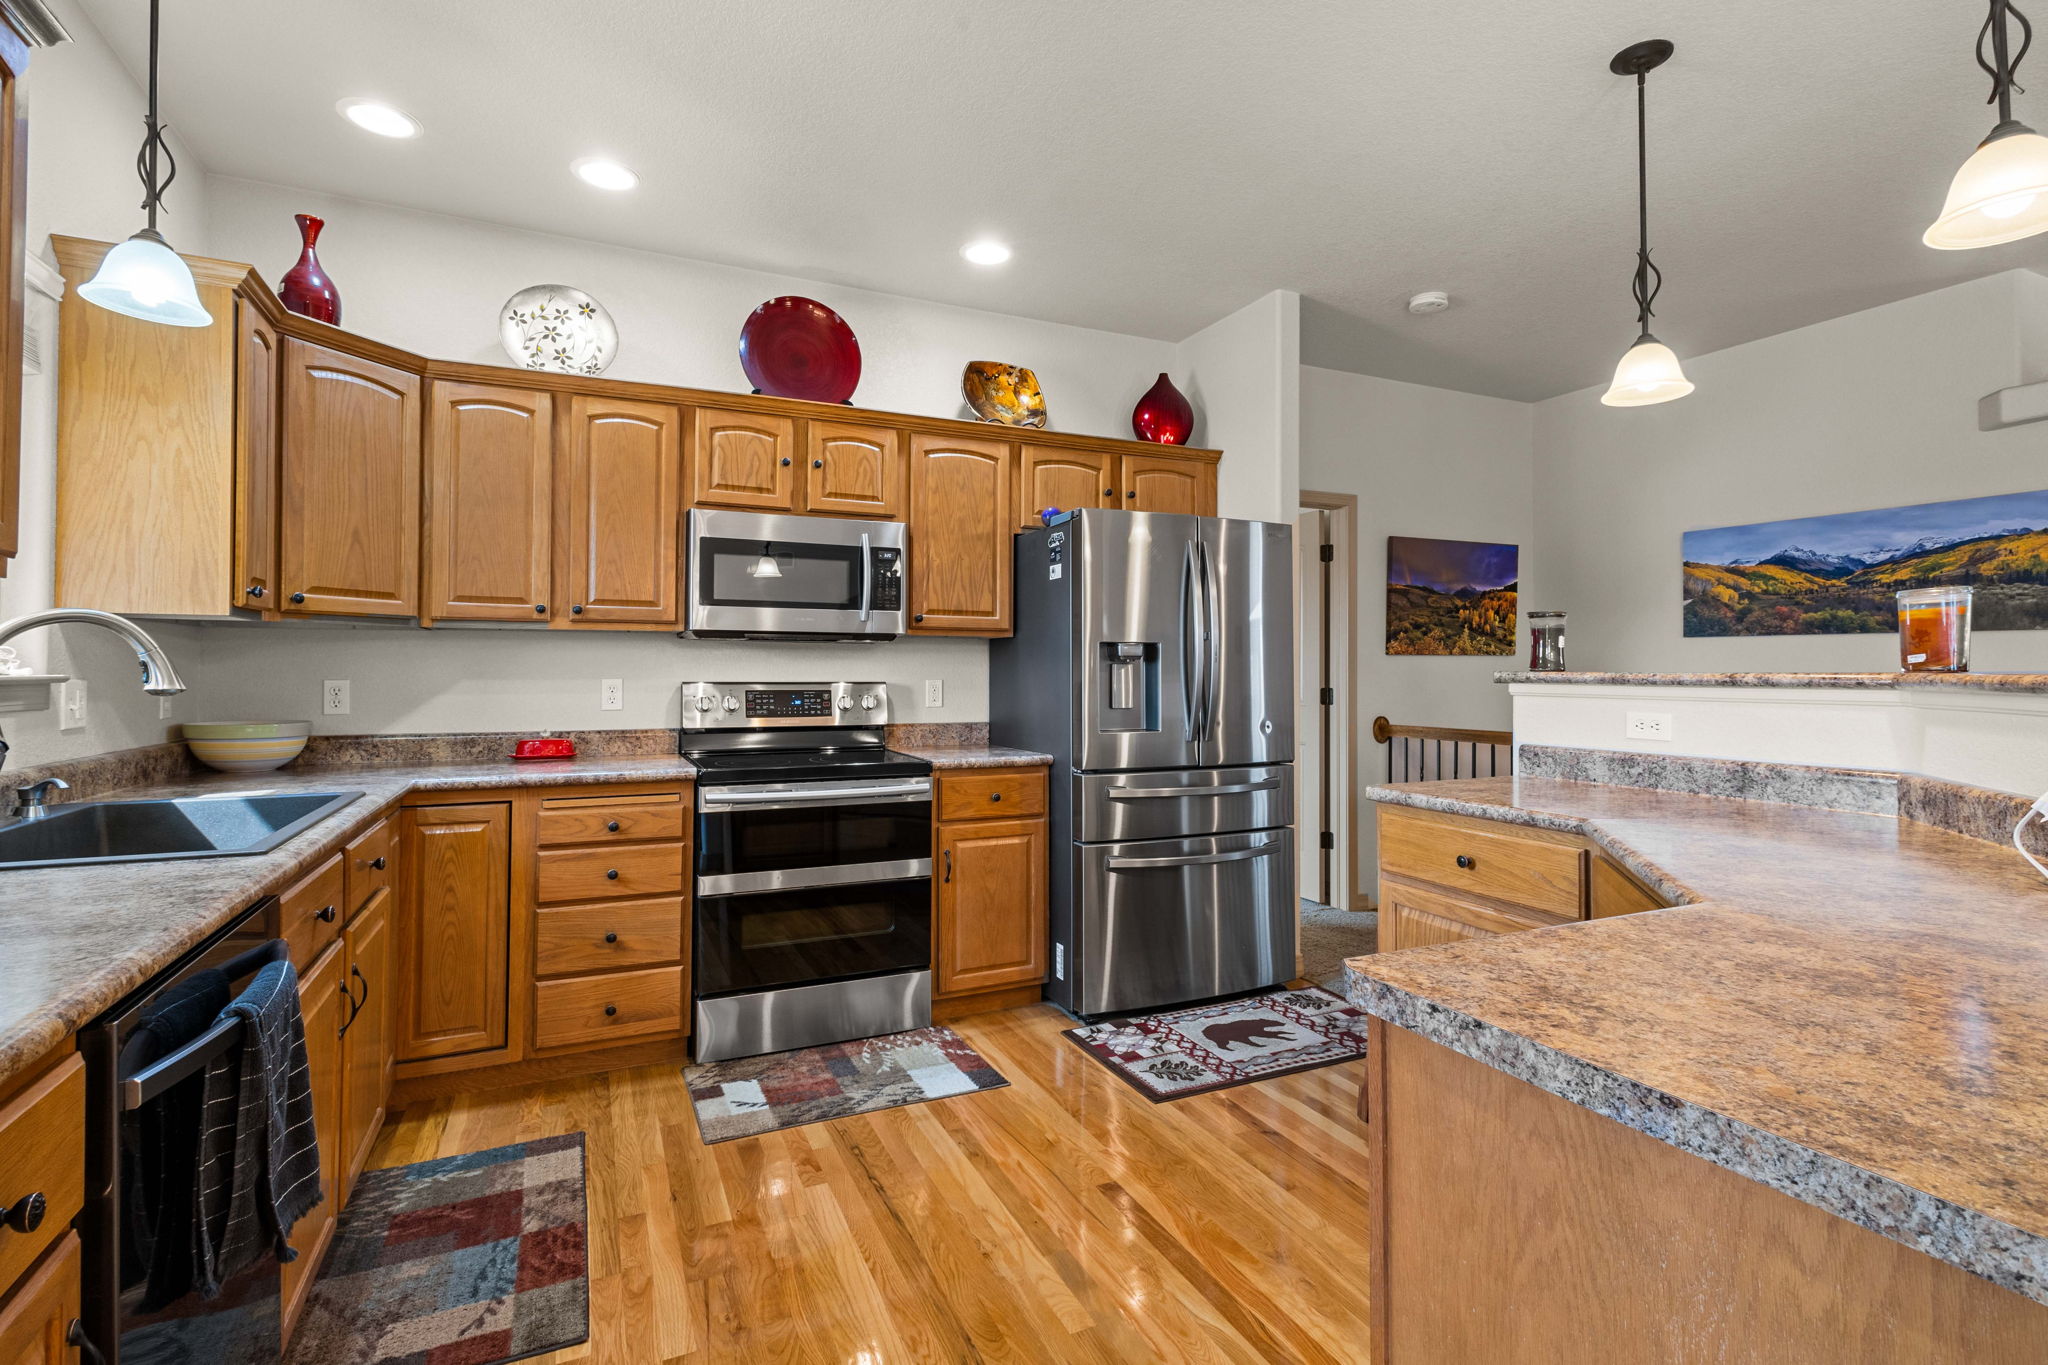 The kitchen has ample storage, high-quality cabinets with elegant crown molding, a convenient high-top island, a sizable pantry, and modern stainless-steel appliances, including an oven that can be utilized as a single unit or split into two, simplifying holiday meal preparations.